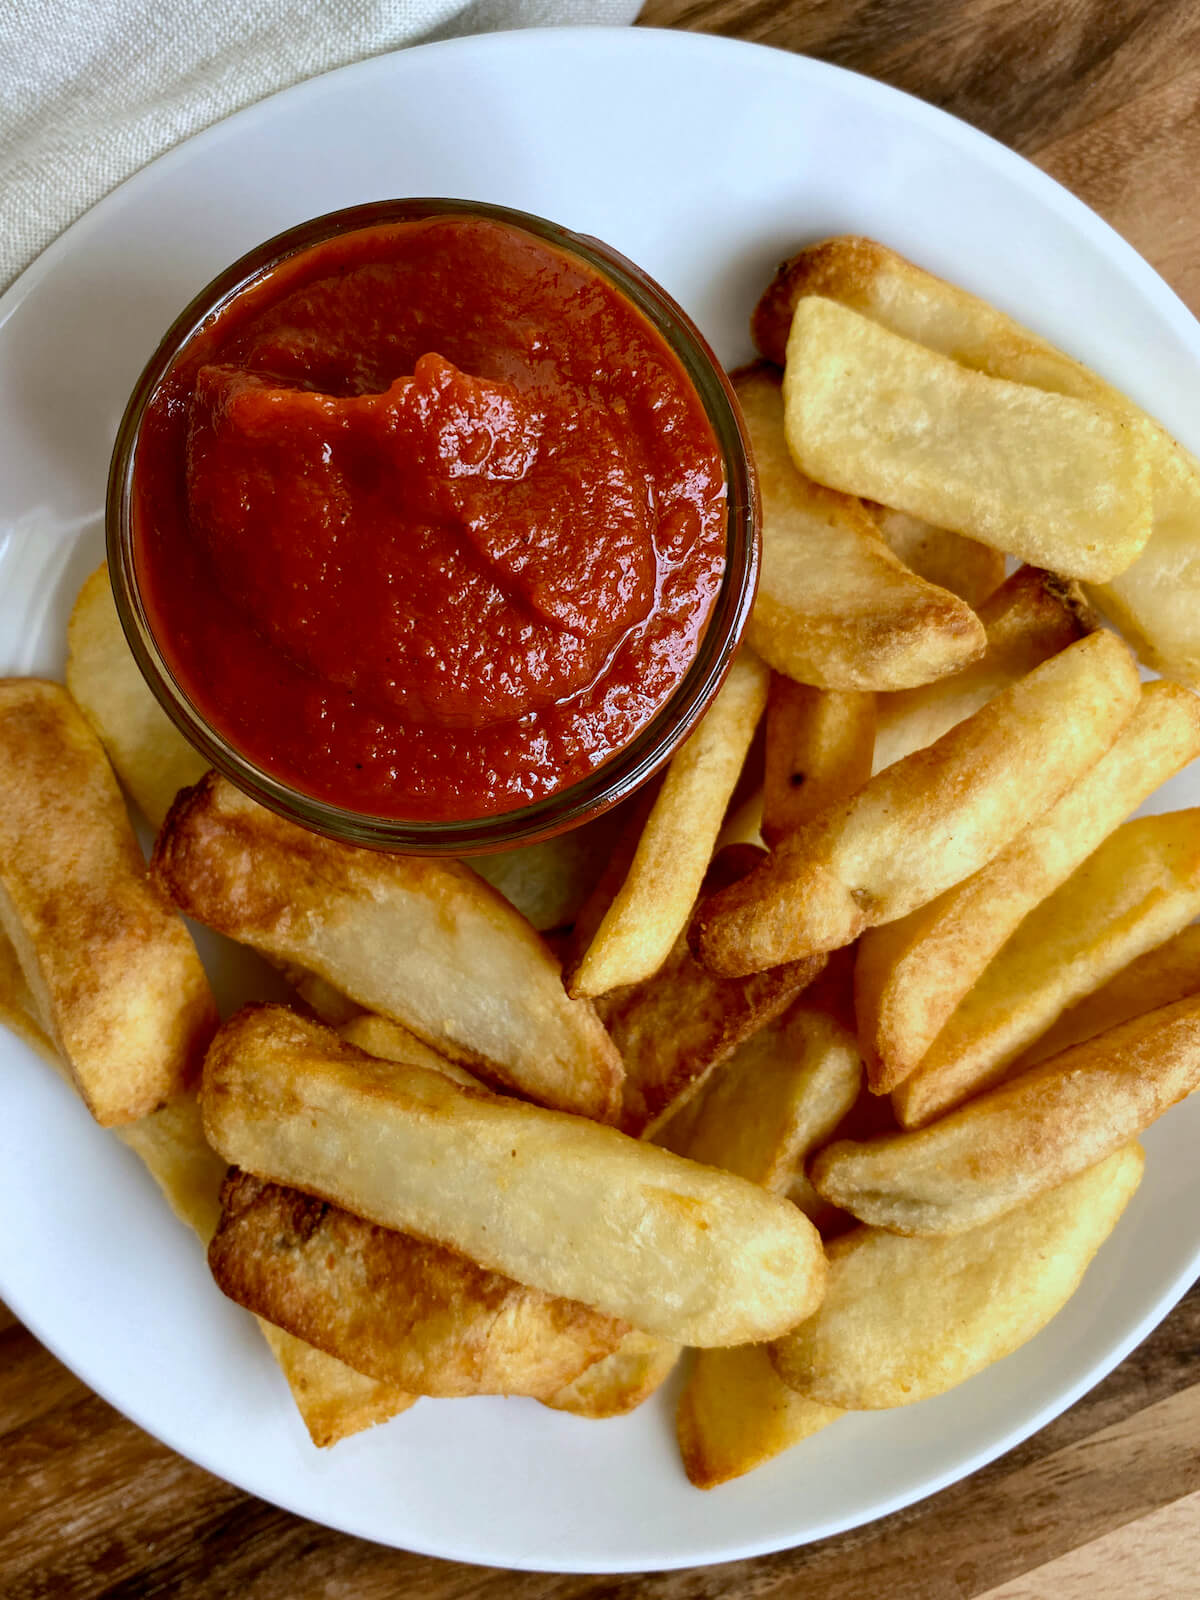 A jar of homemade ketchup on a plate of steak fries.